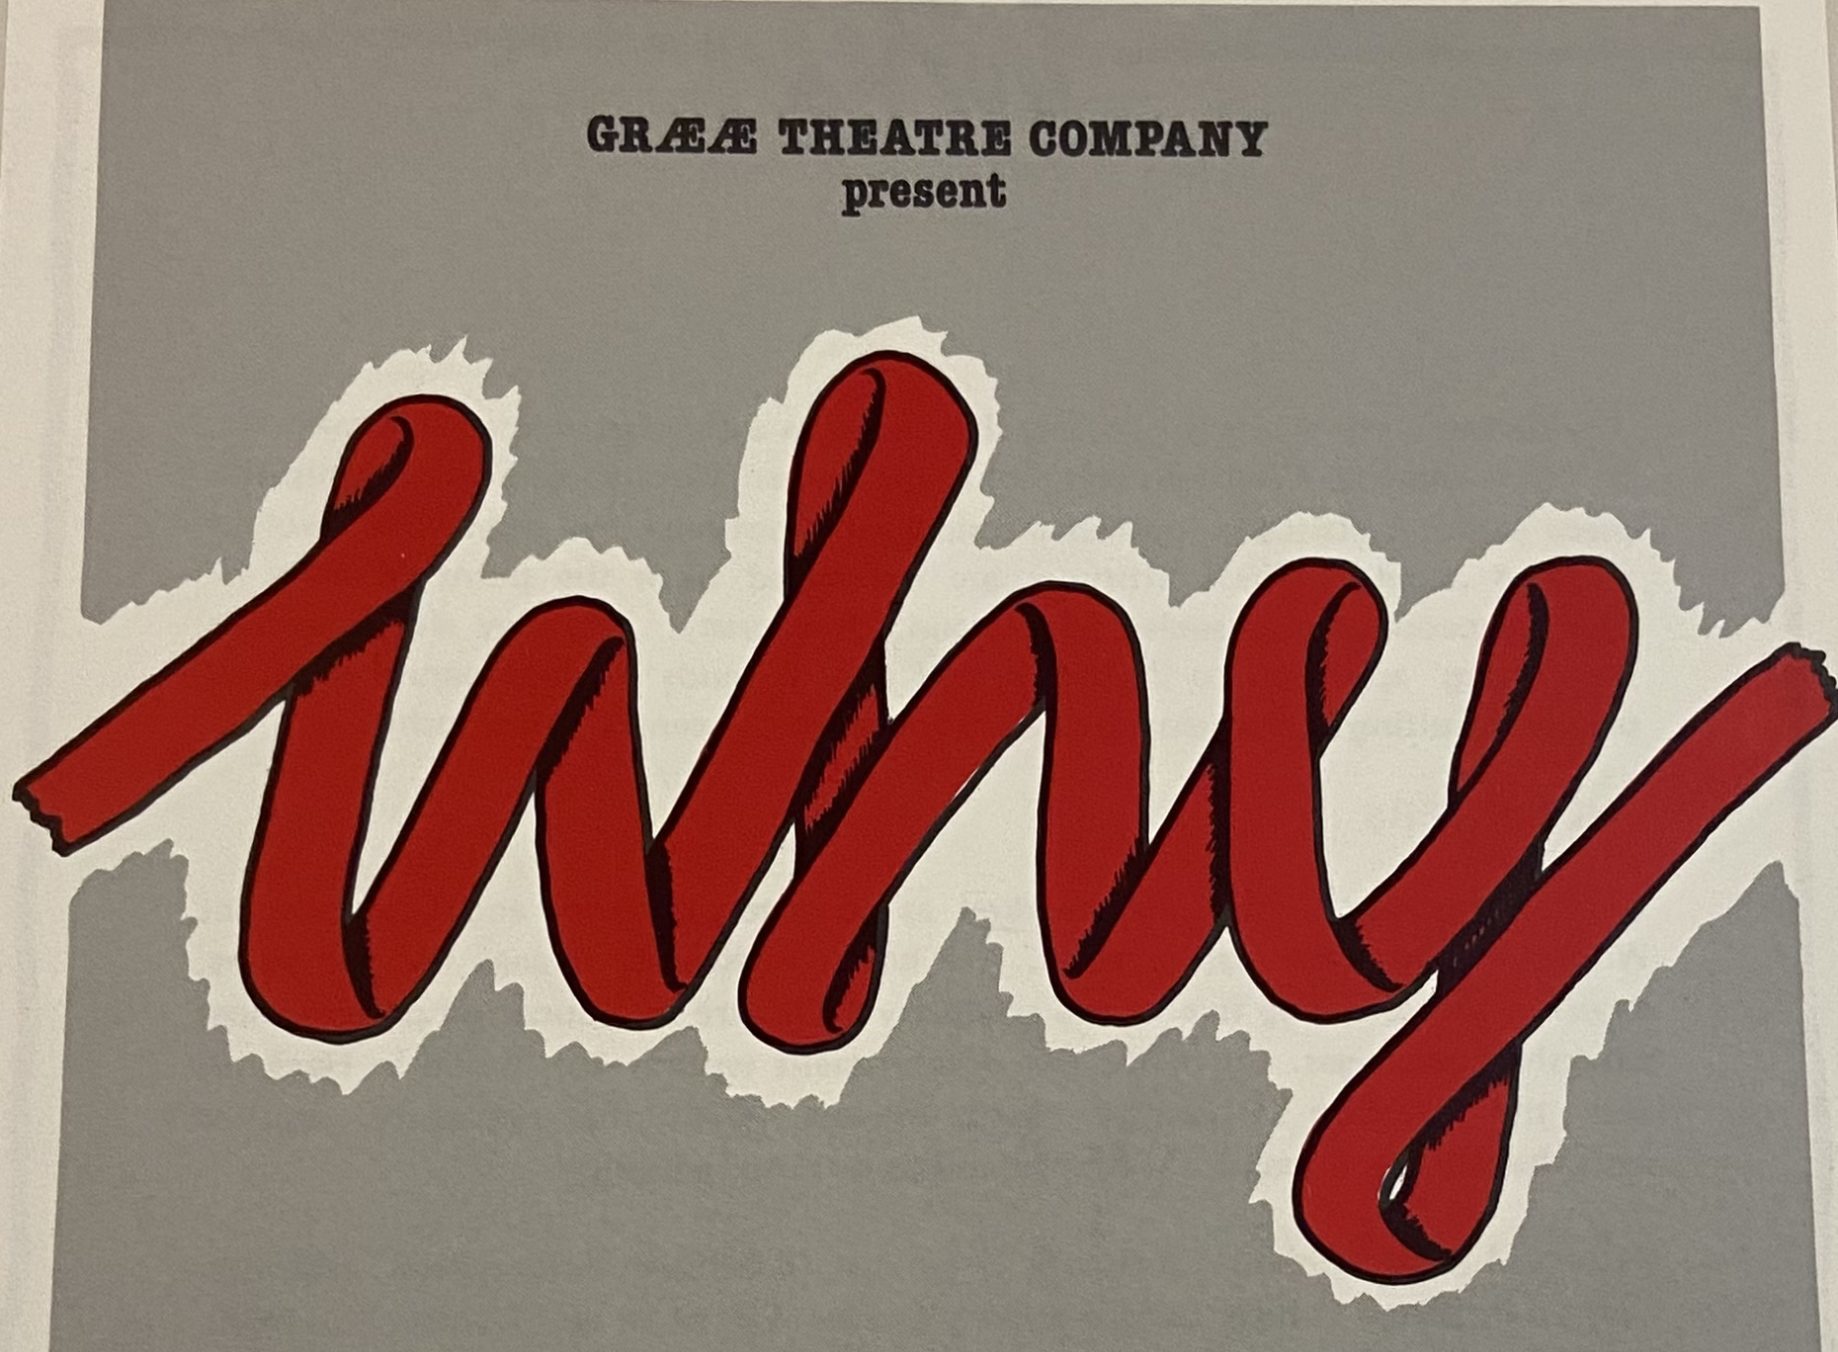 A poster promoting Graeae's production of 'Why'. The poster has a grey background, black text at the top that reads "Graeae Theatre Company present", and below this, large red text that reads "why".